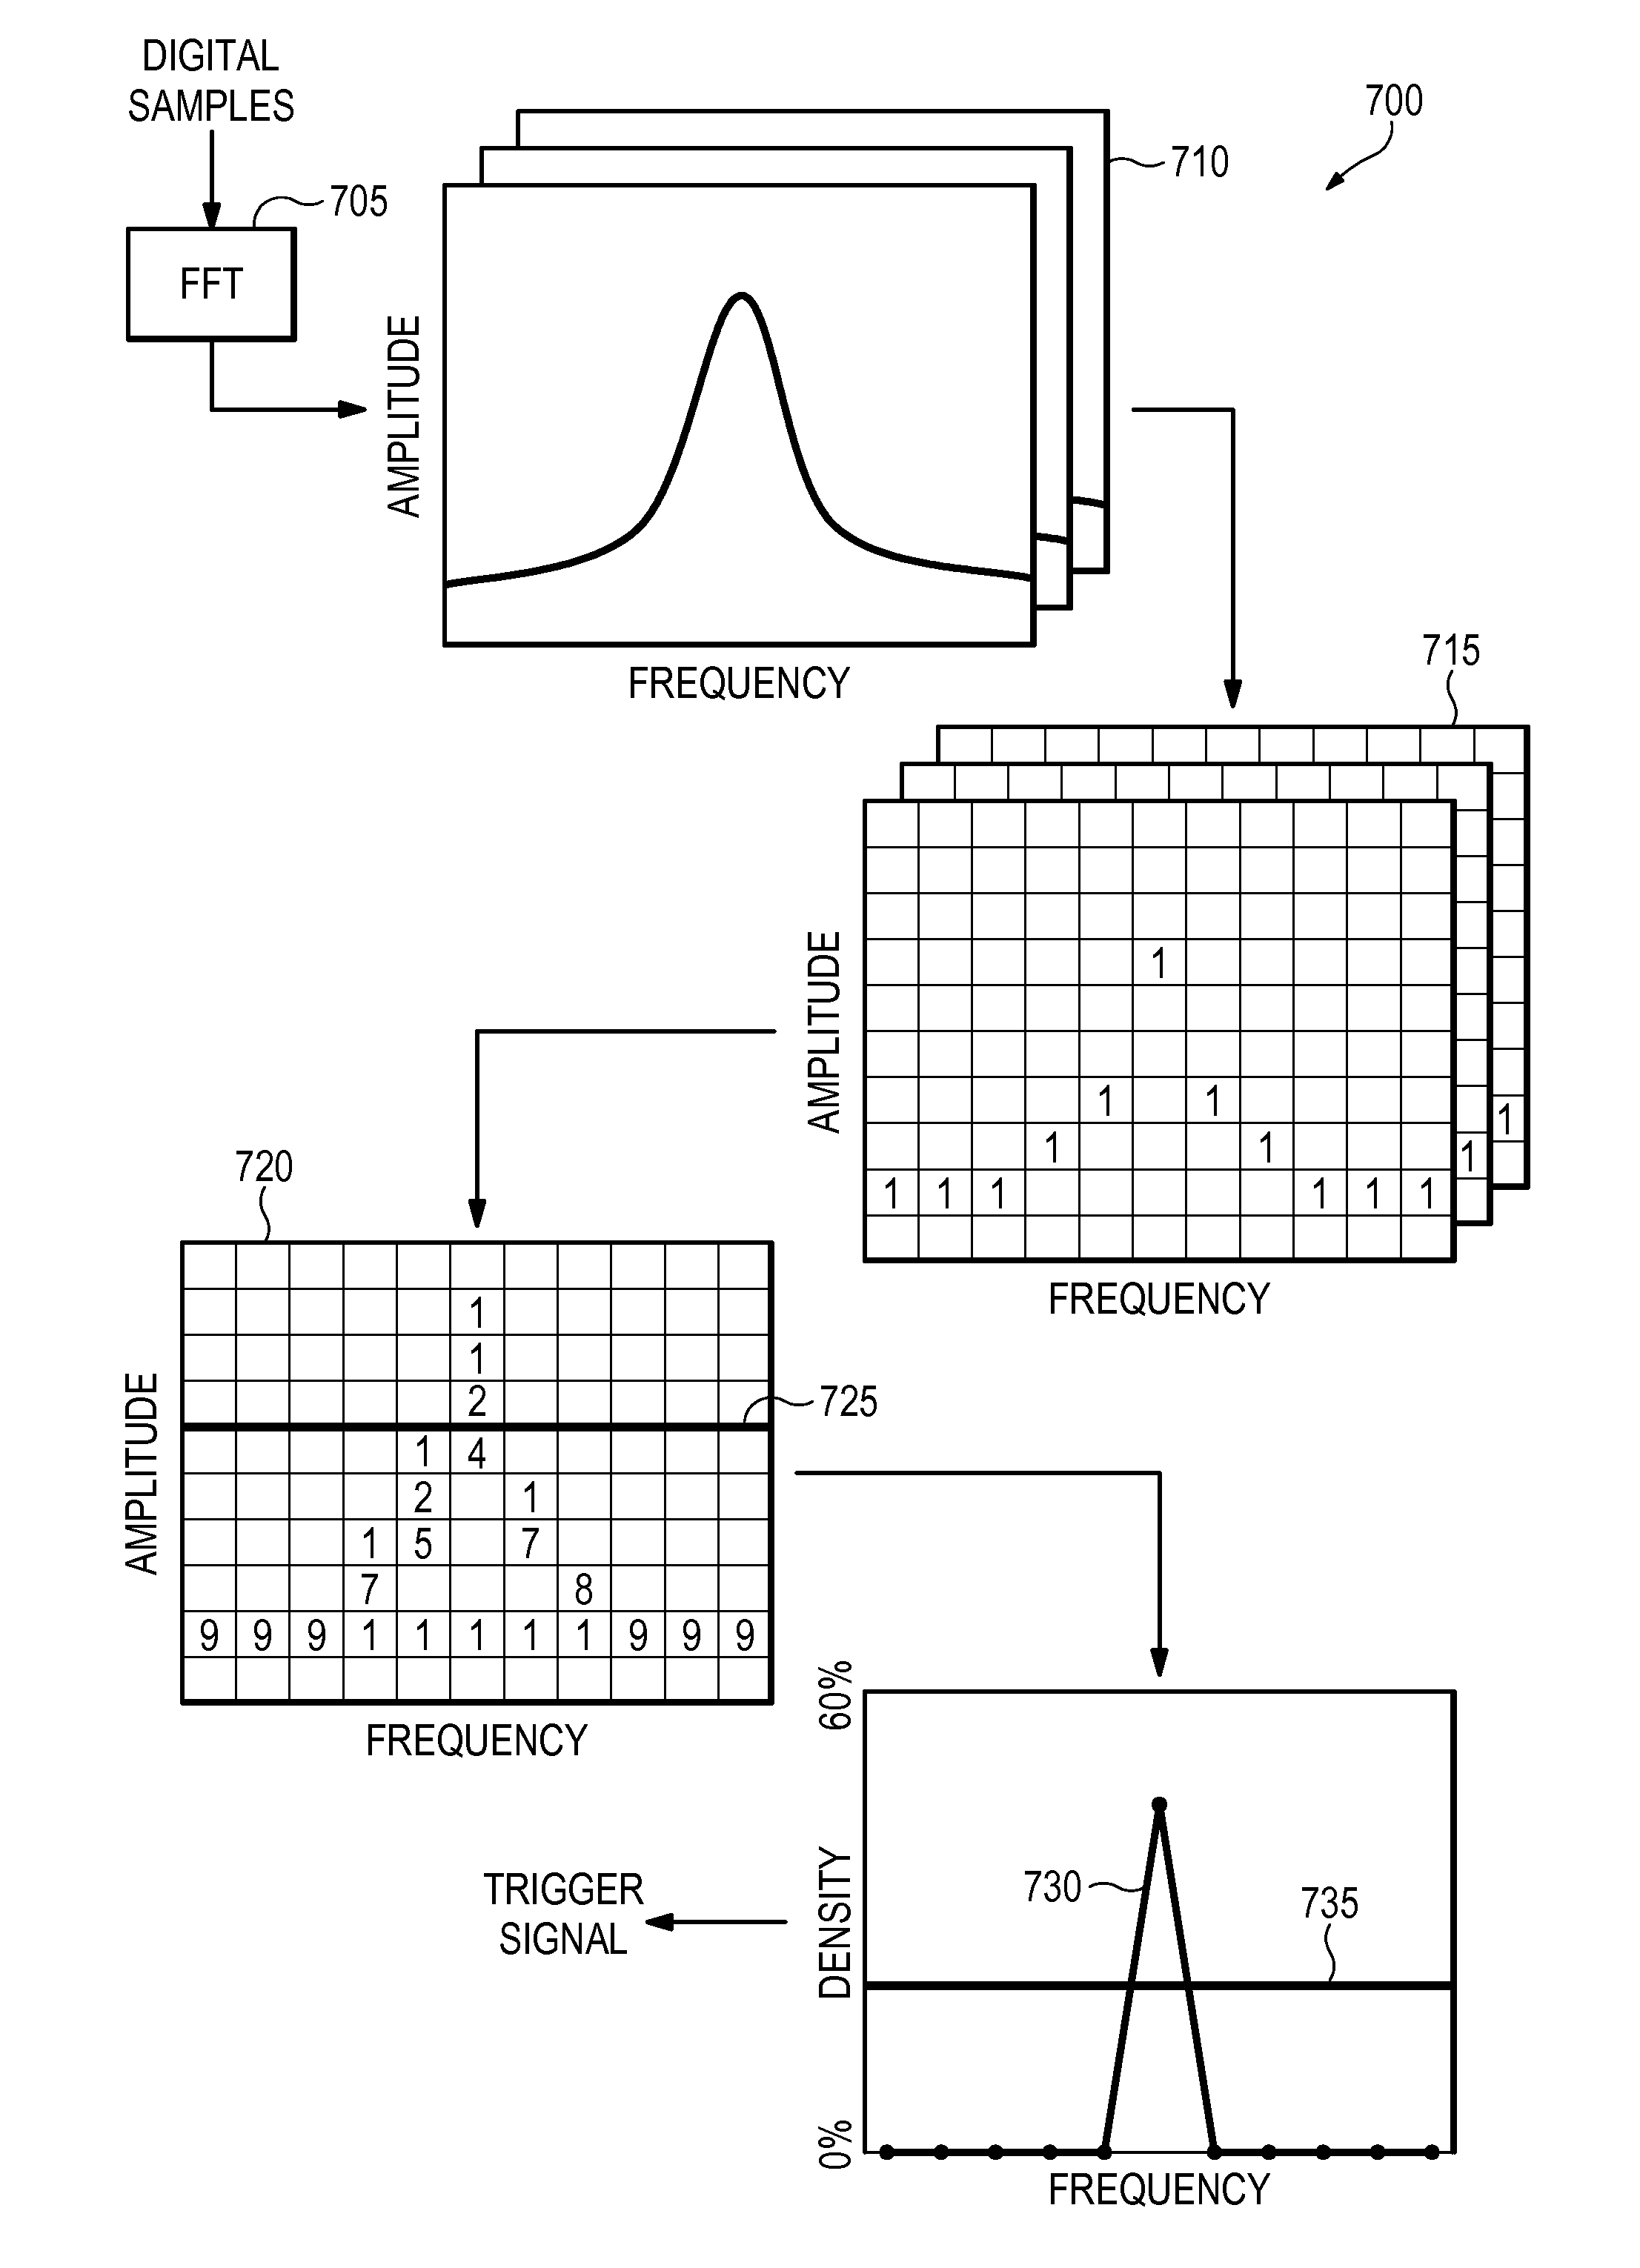 Density trace measurement and triggering in frequency domain bitmaps